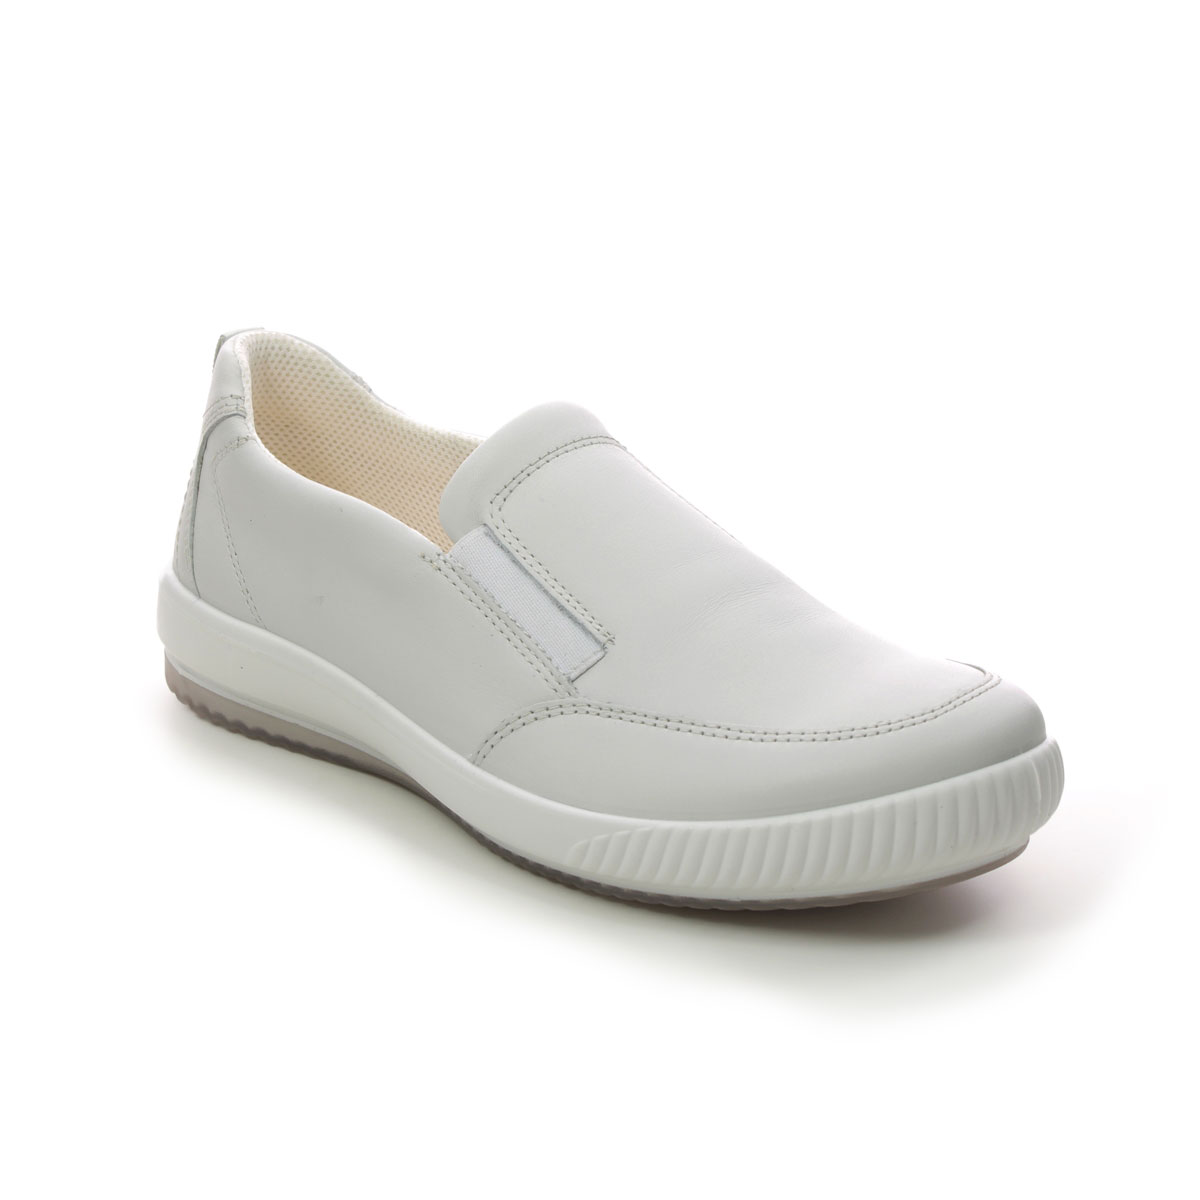 Legero Tanaro 5 Slip White Leather Womens Comfort Slip On Shoes 2000215-1000 In Size 4.5 In Plain White Leather